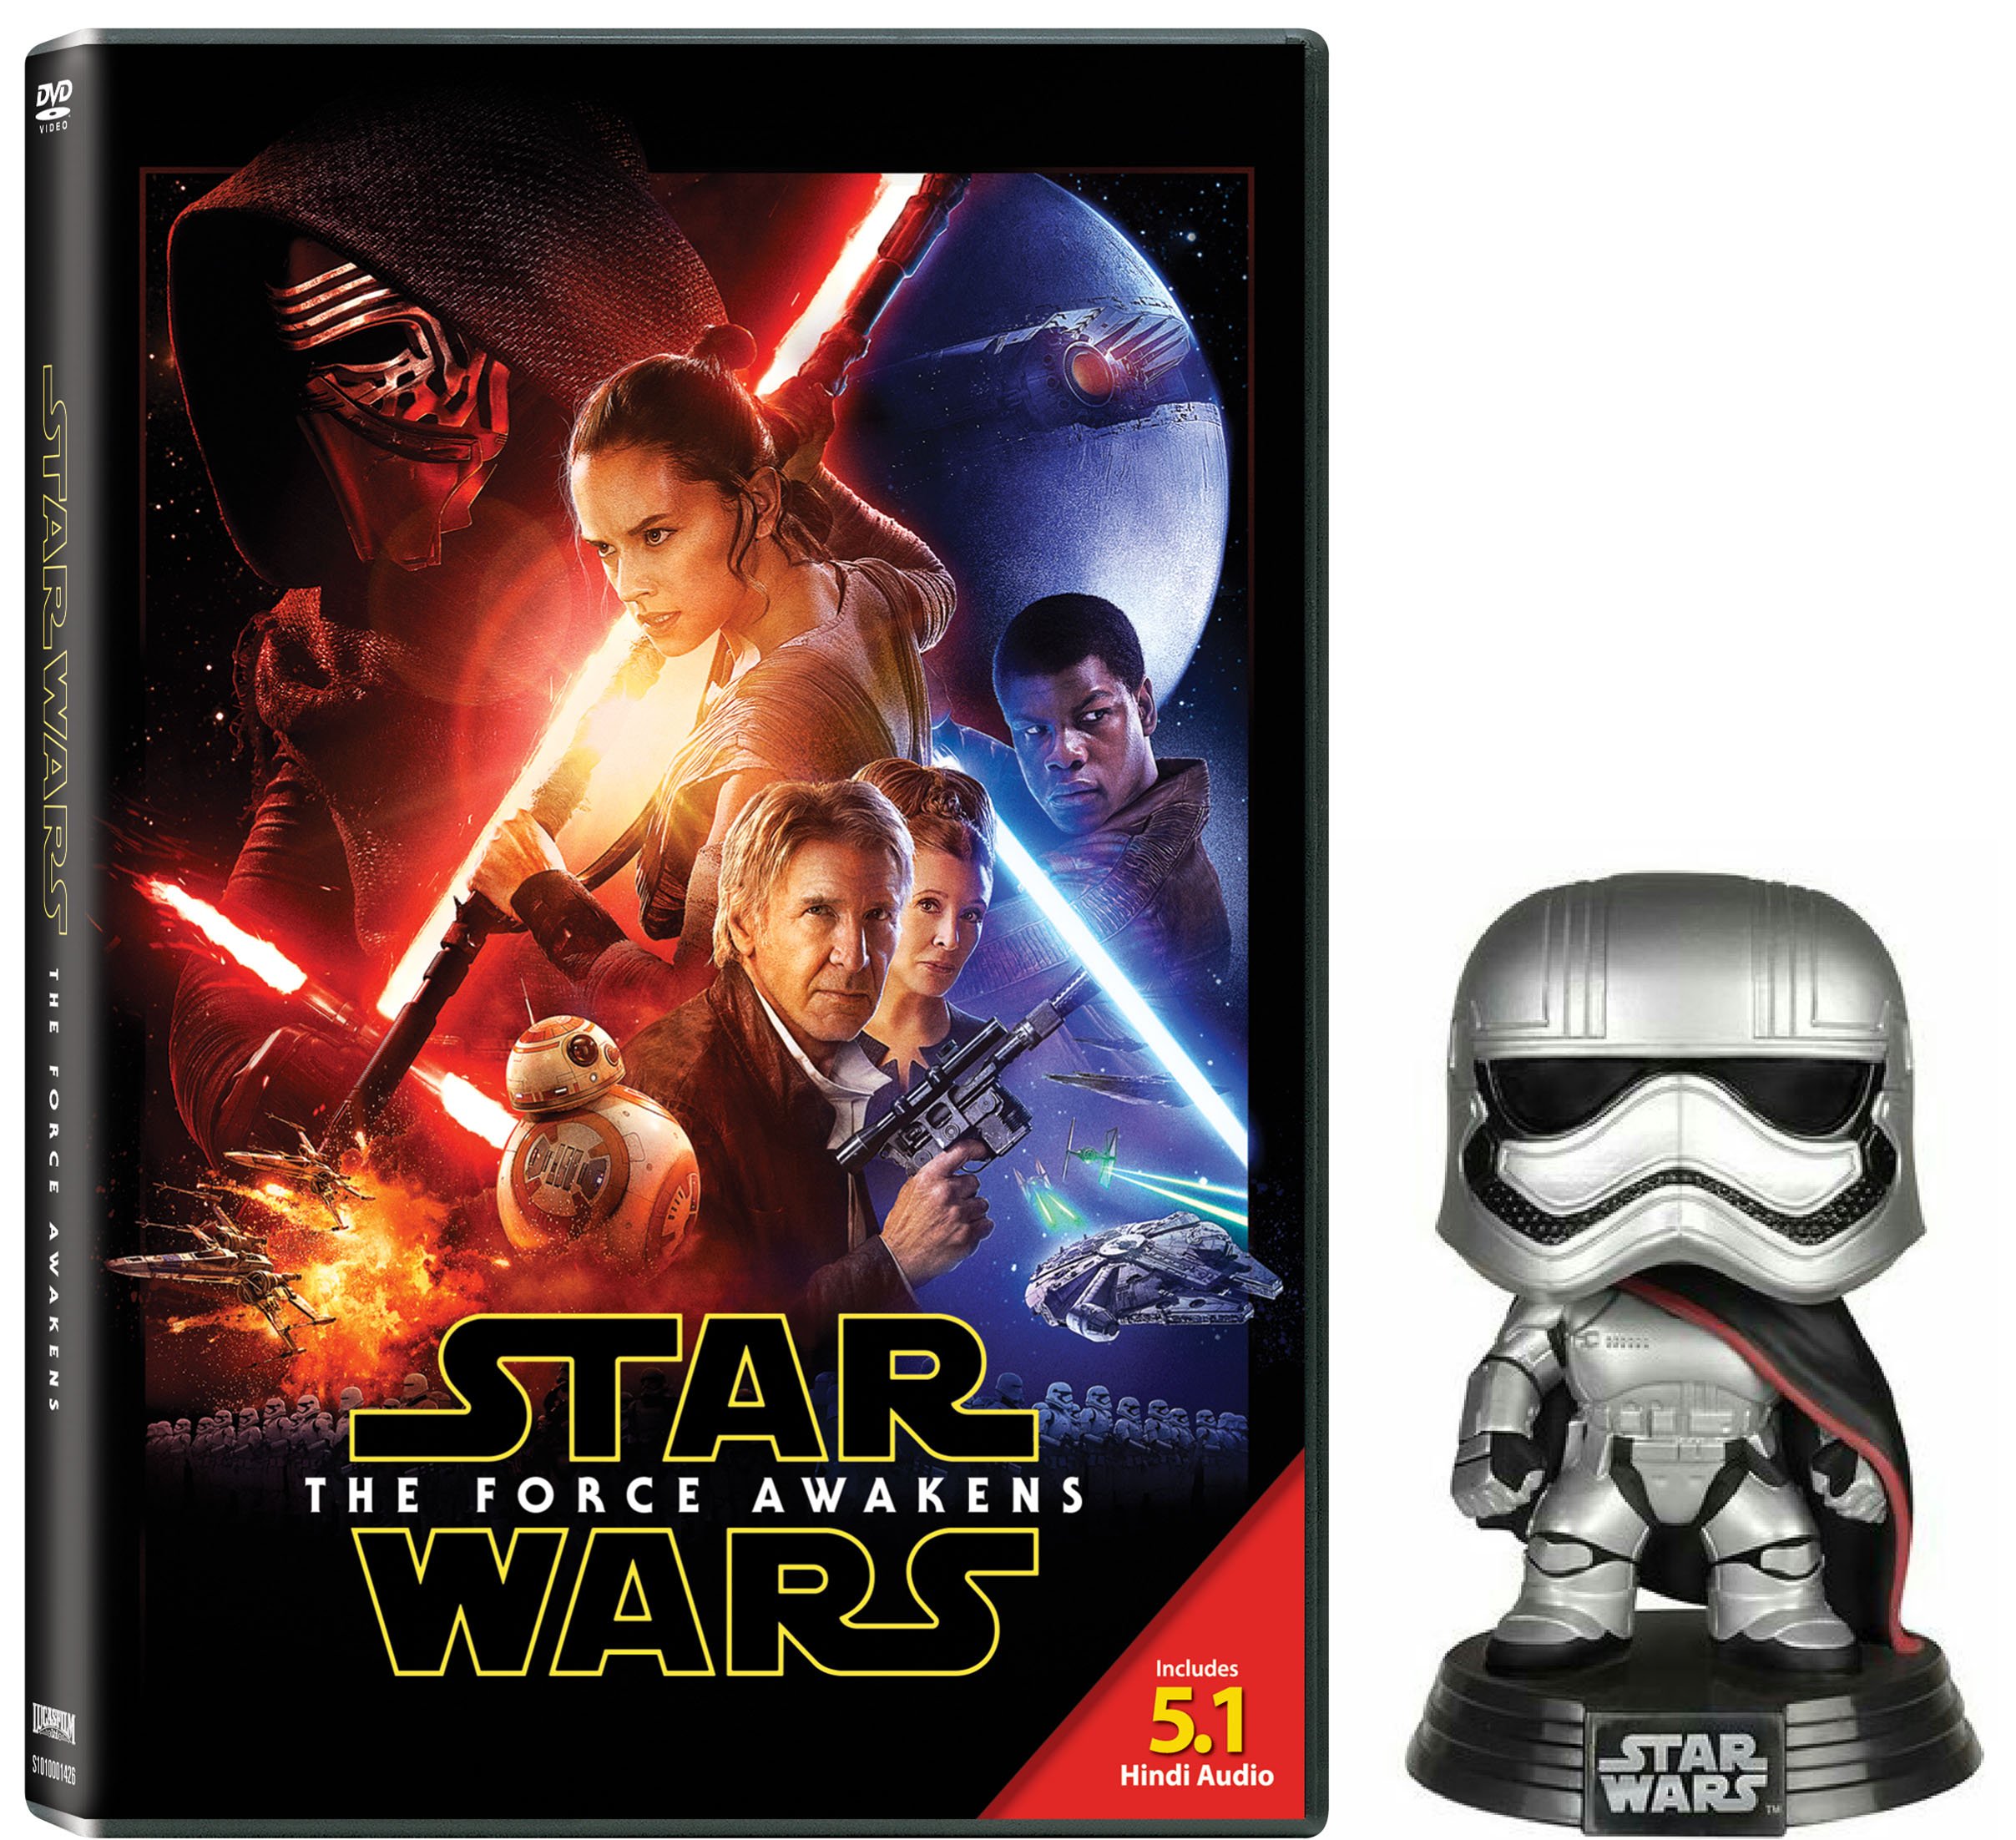 star-wars-the-force-awakens-with-captain-phasma-bobble-head-movie-pur